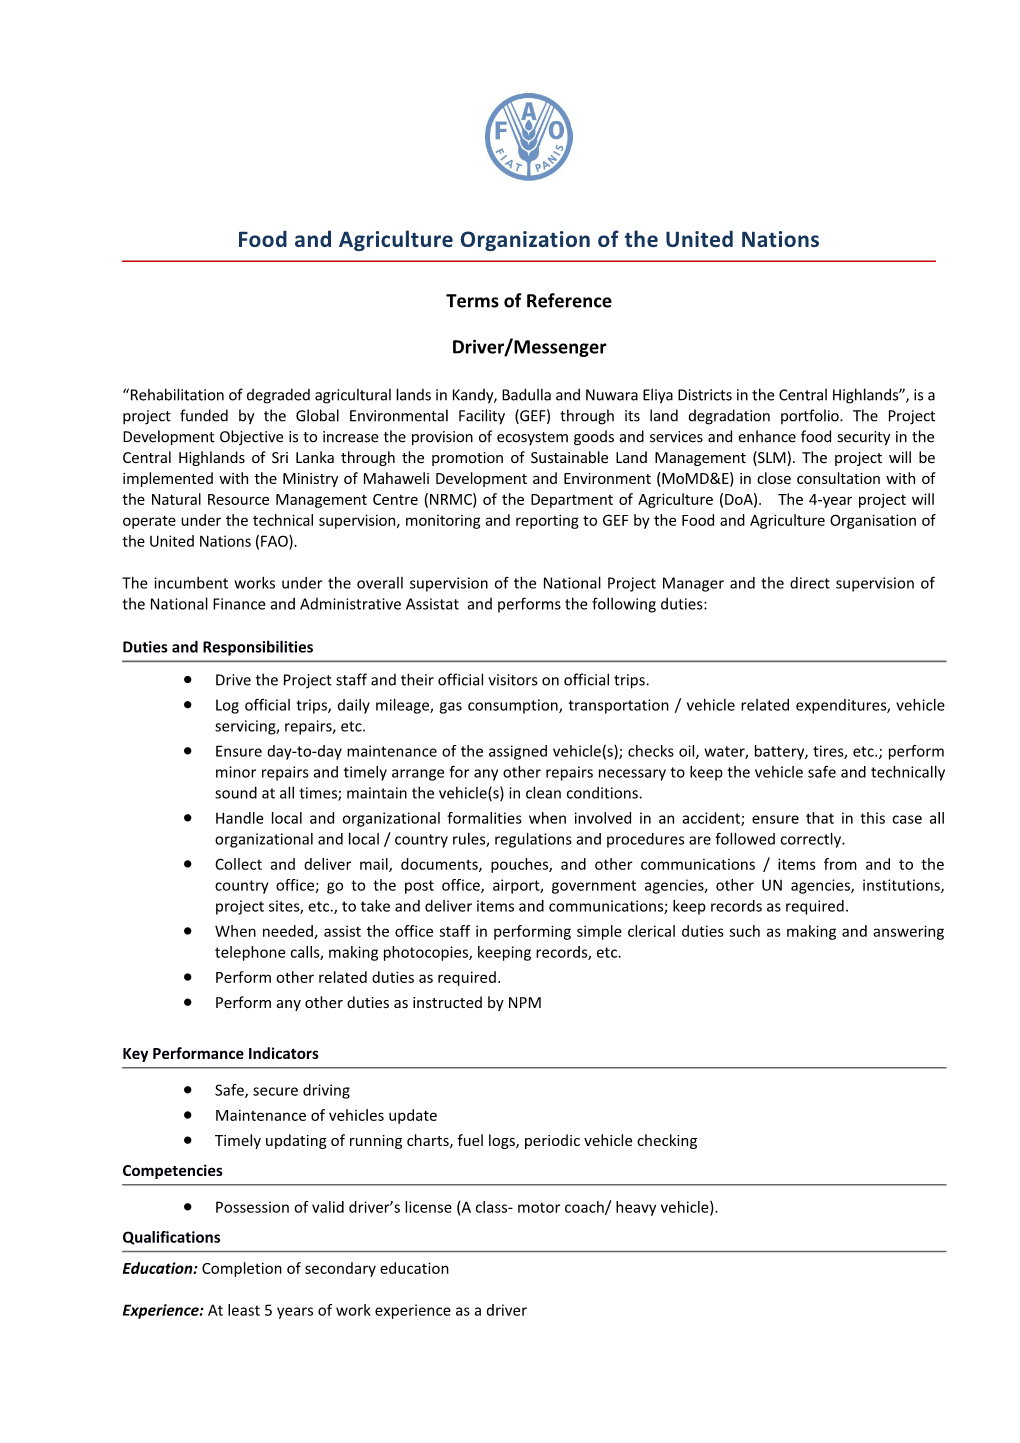 Food and Agriculture Organization of the United Nations s1